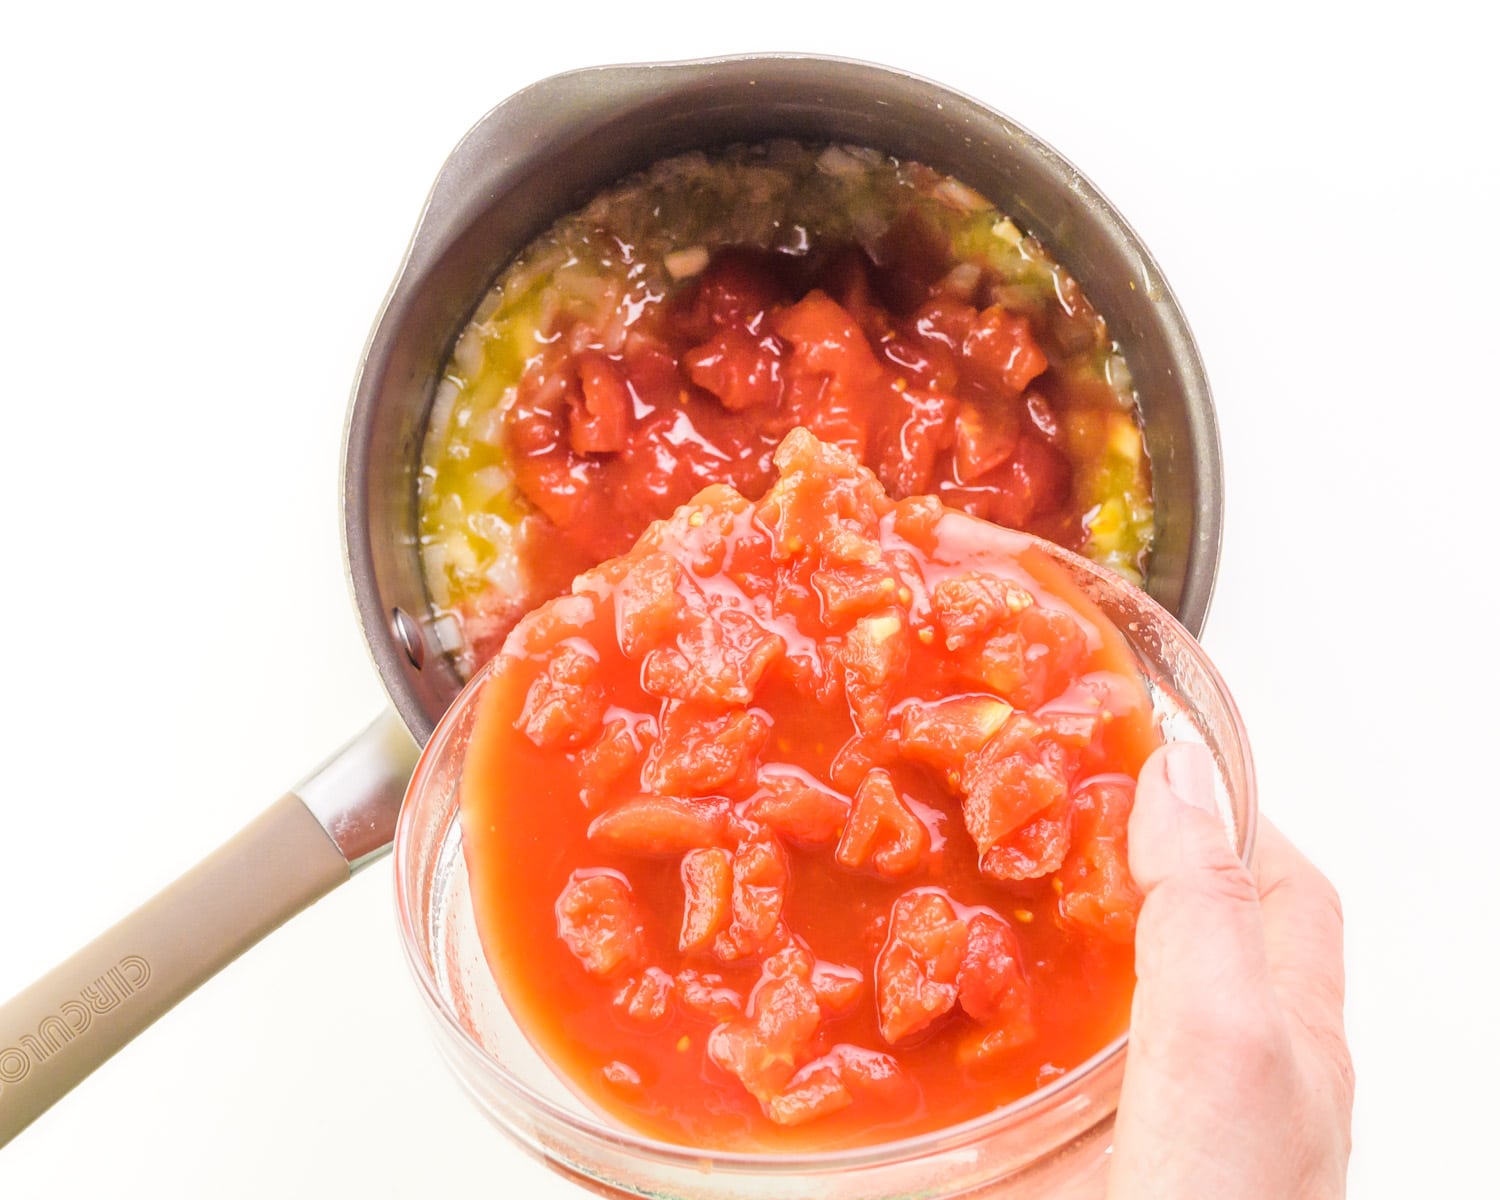 A hand holds a bowl of tomatoes, pouring it into a saucepan with cooked onions.